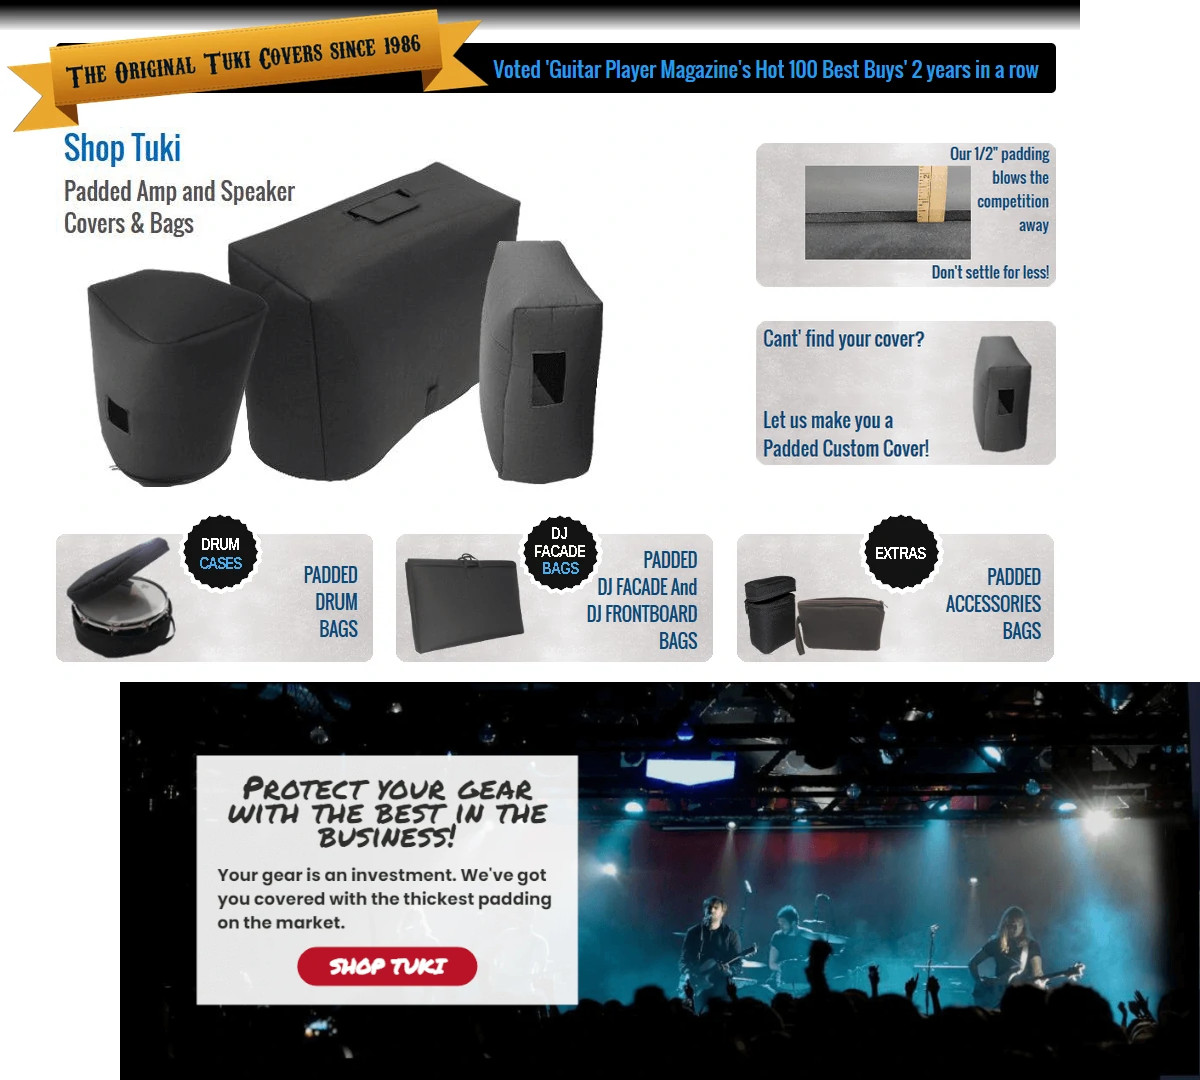 Custom Amp Covers home page after